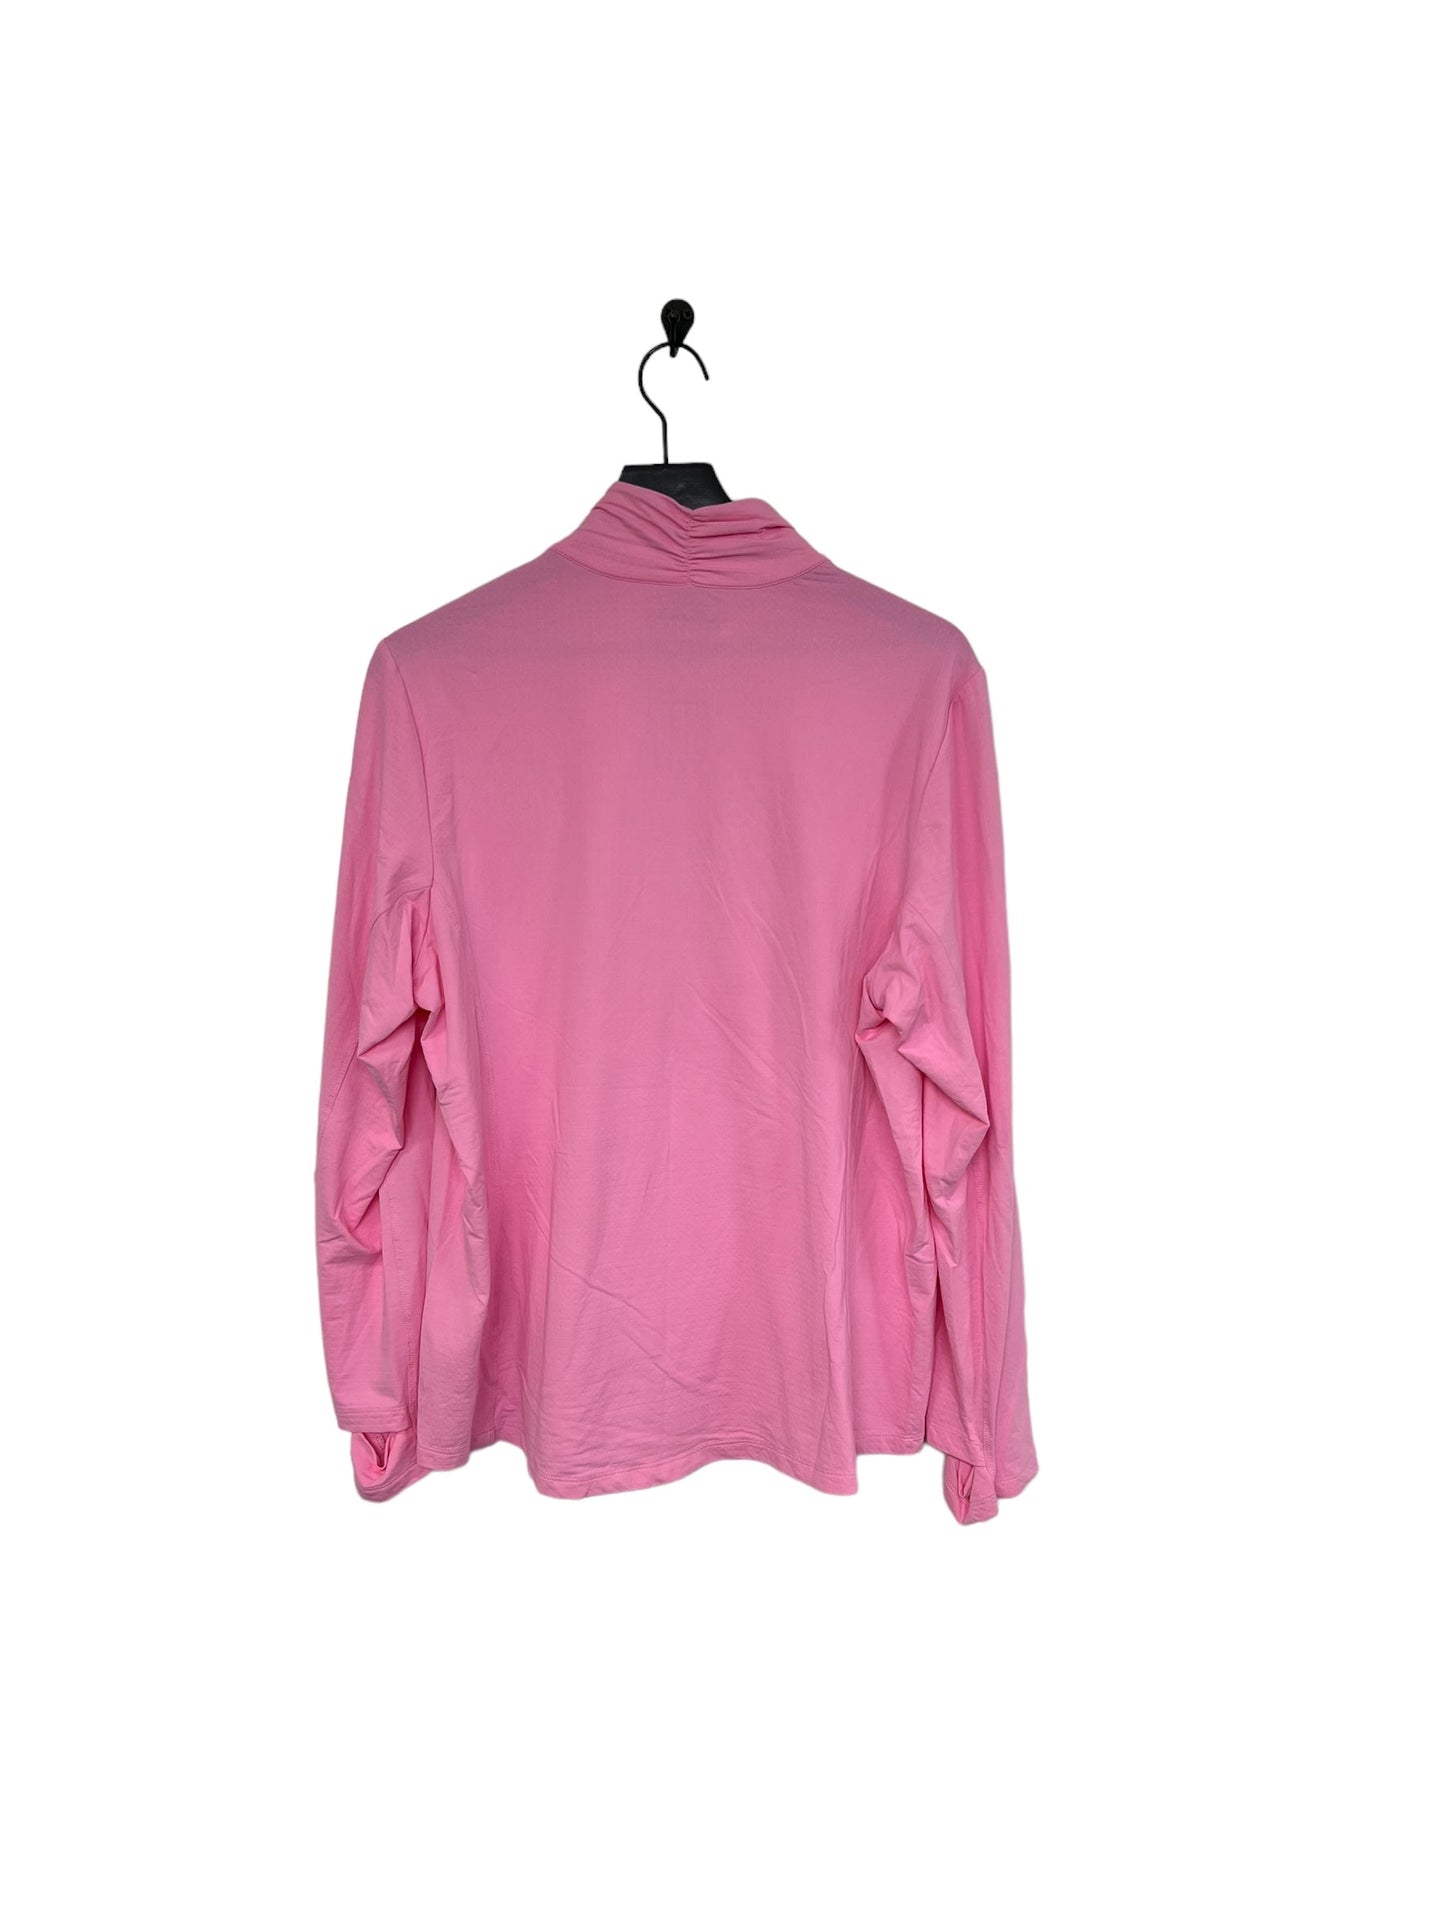 Athletic Top Long Sleeve Collar By Clothes Mentor  Size: Xxl